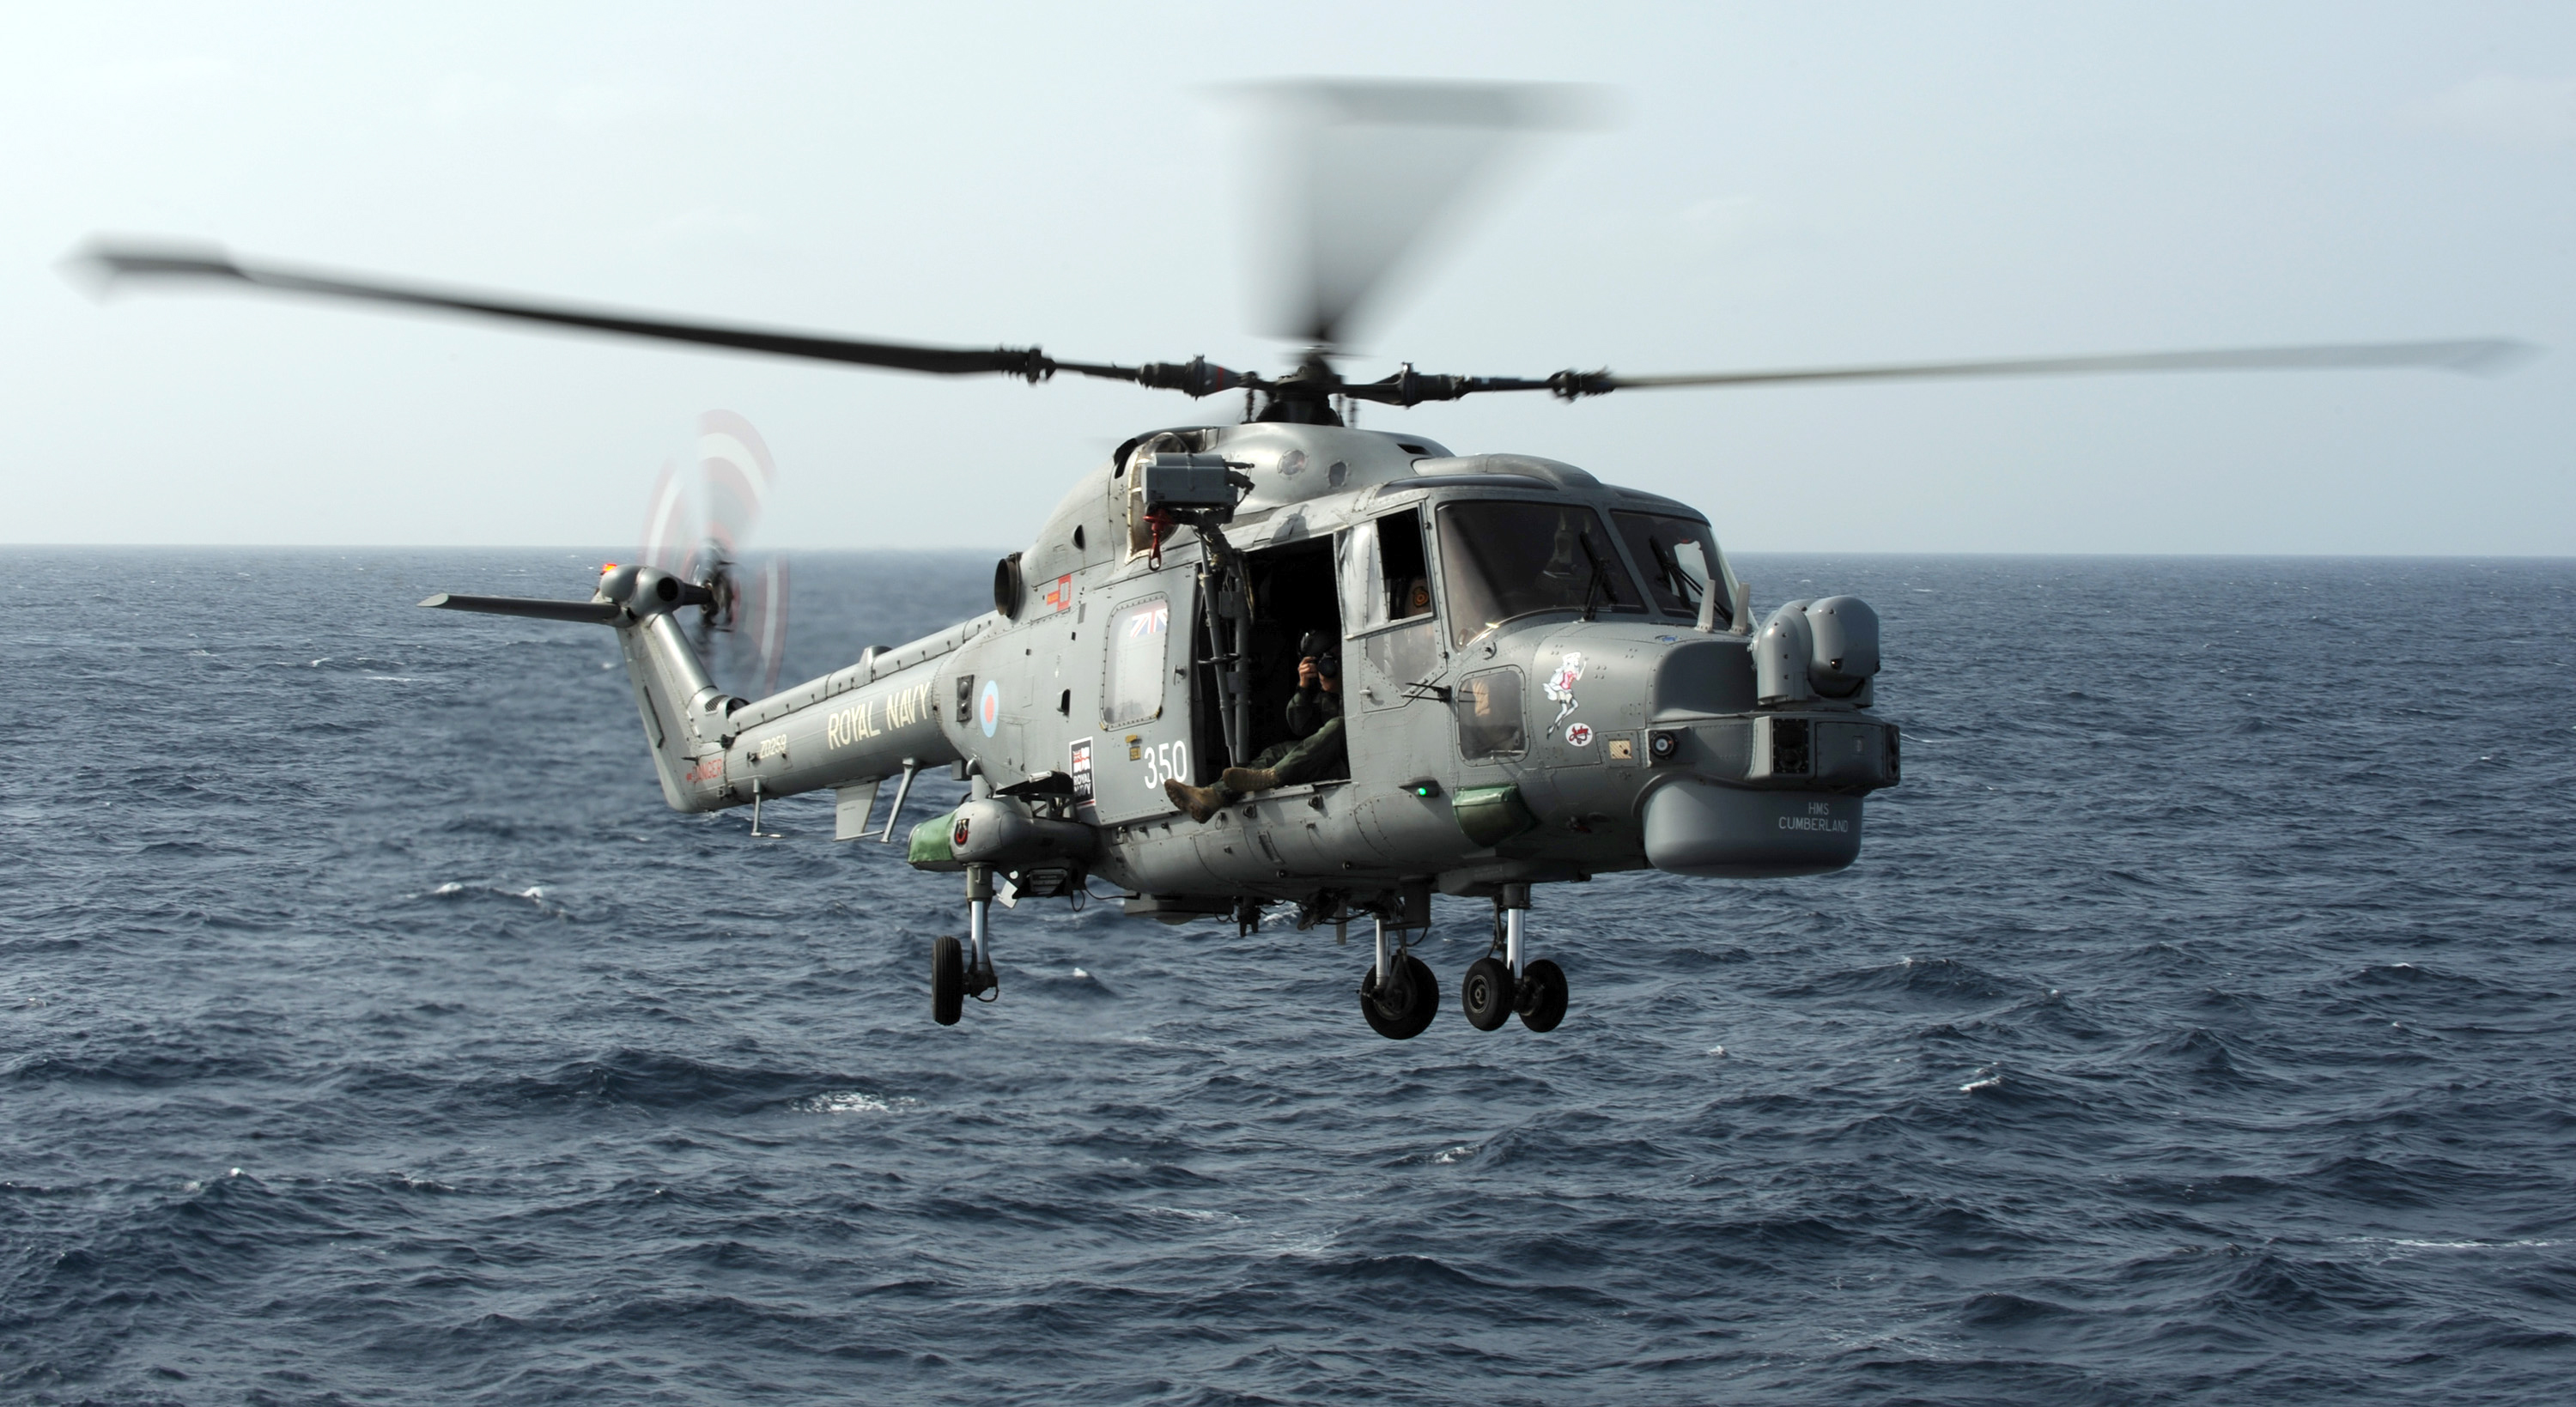 Helicopter Capturing Images Of A Lynx Landing On HMS Cornwall MOD 45150757